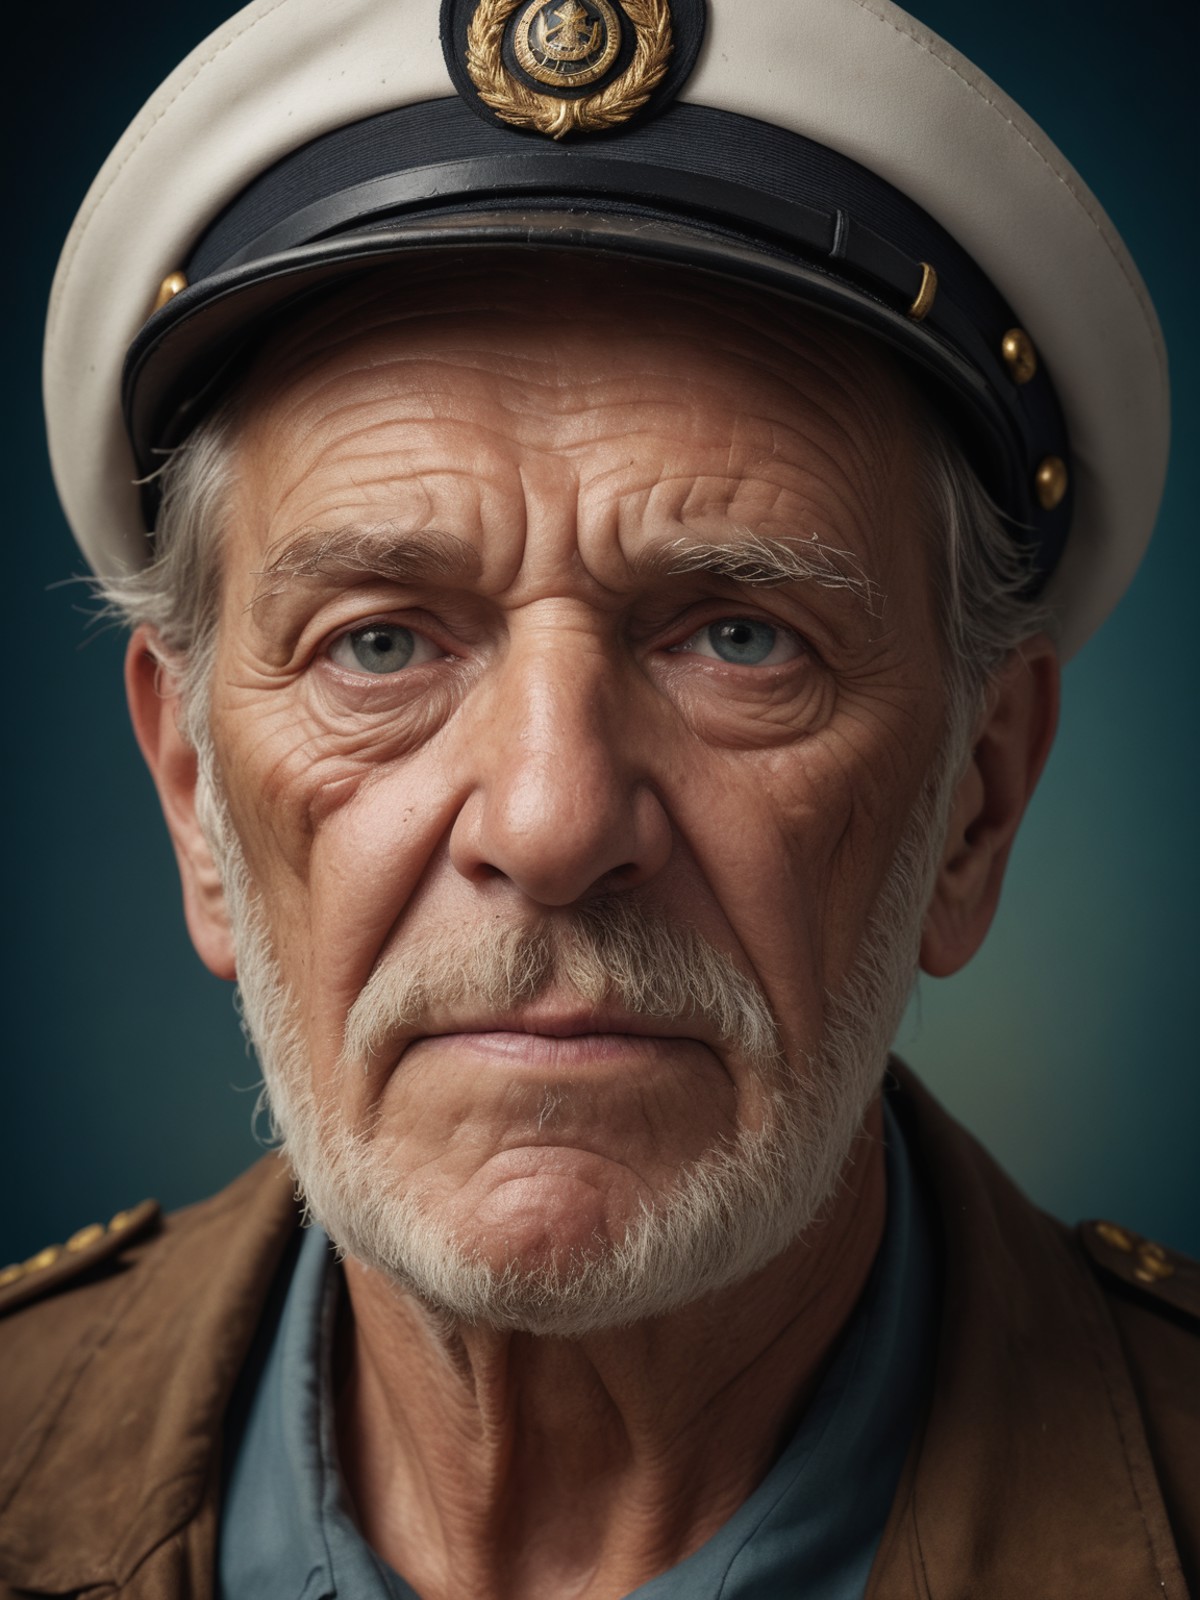 a grungy old sea captian, with wrinkly face, high detail high definition photograph or immense resolution and intricate ca...